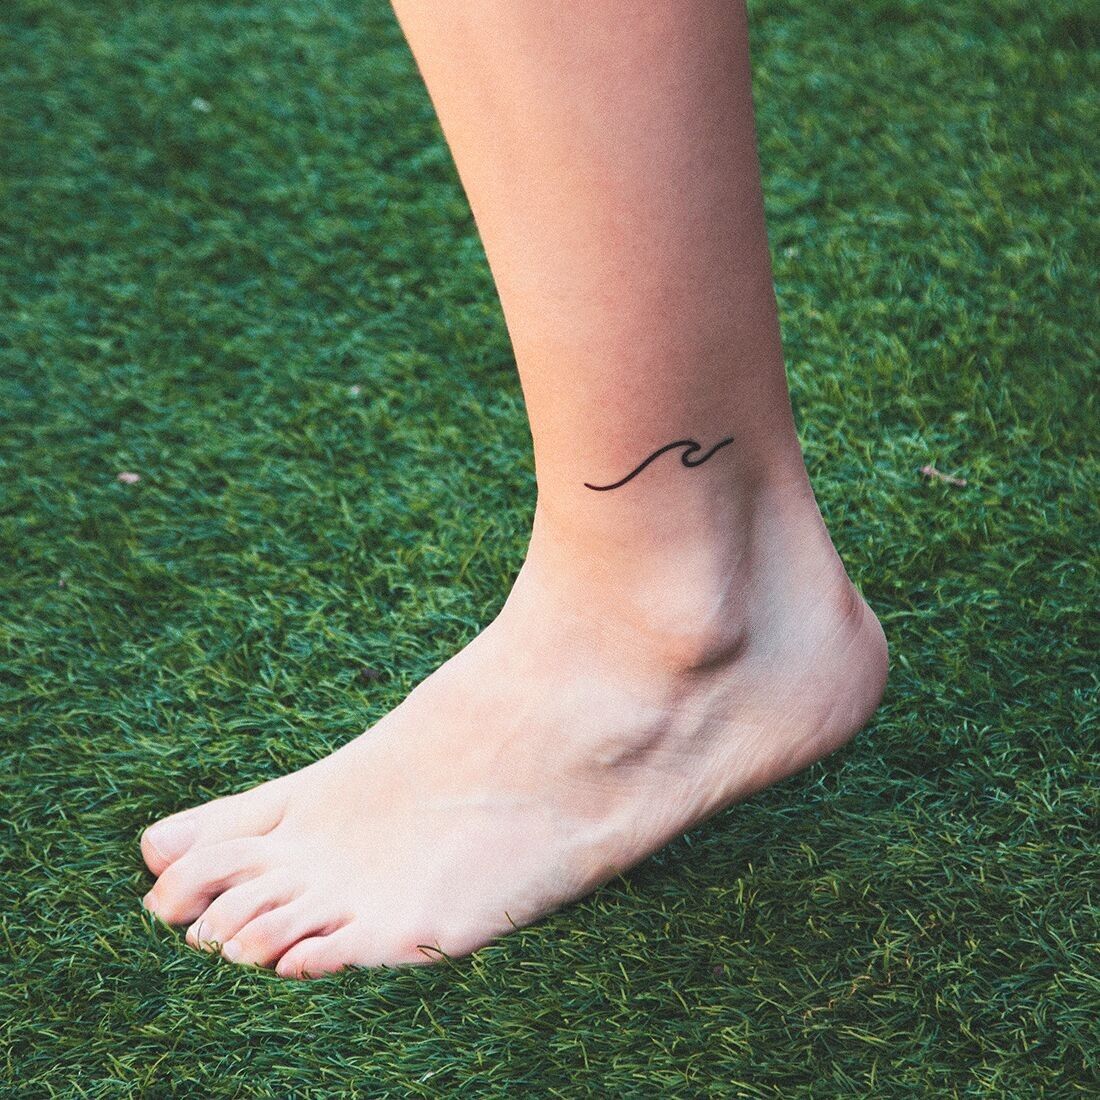 Minimalistic tiny wave tattoo placed on the achilles.